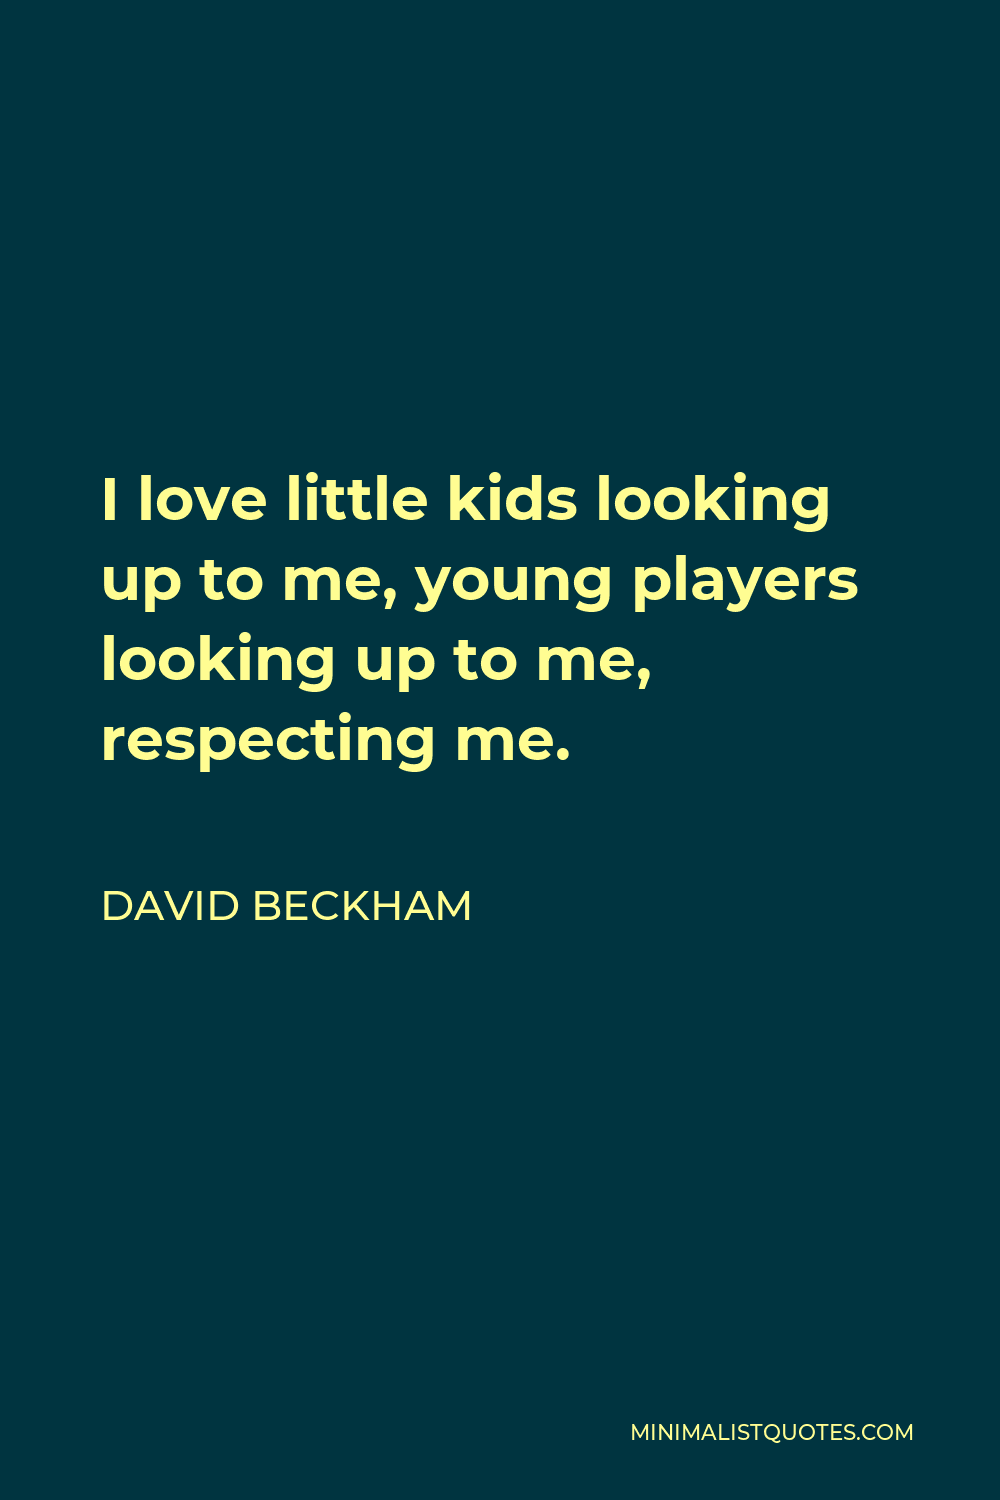 David Beckham Quote - I love little kids looking up to me, young players looking up to me, respecting me.